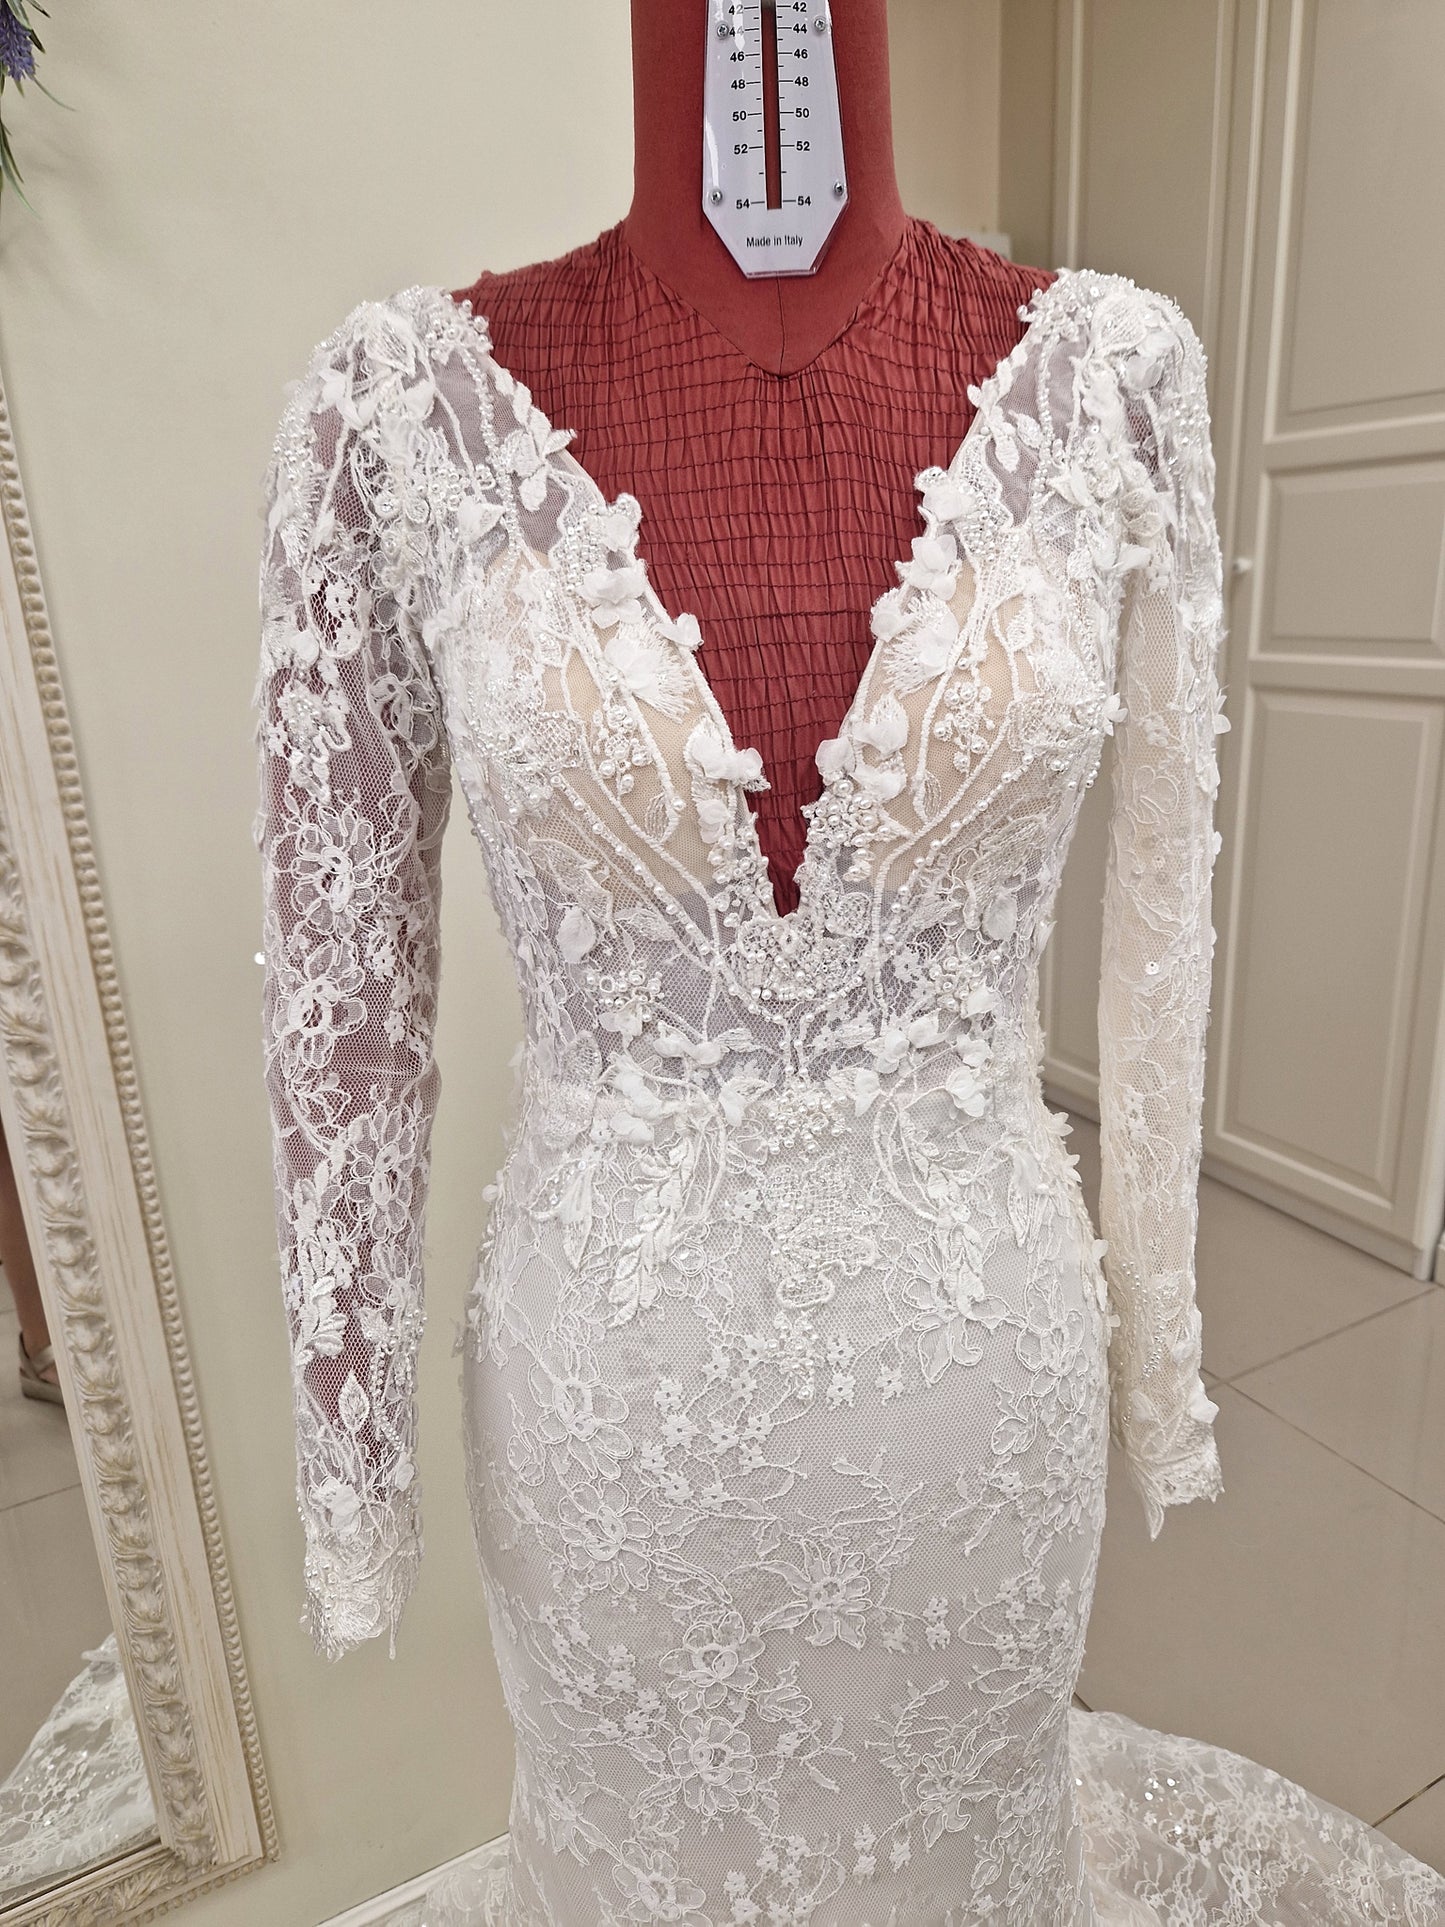 Lace wedding dress from our 2024 couture collection. The gown has a figure hugging trumpet silhouette, long sleeves, deep plunging V-neckline and V-back and lots of beading and sparkle.